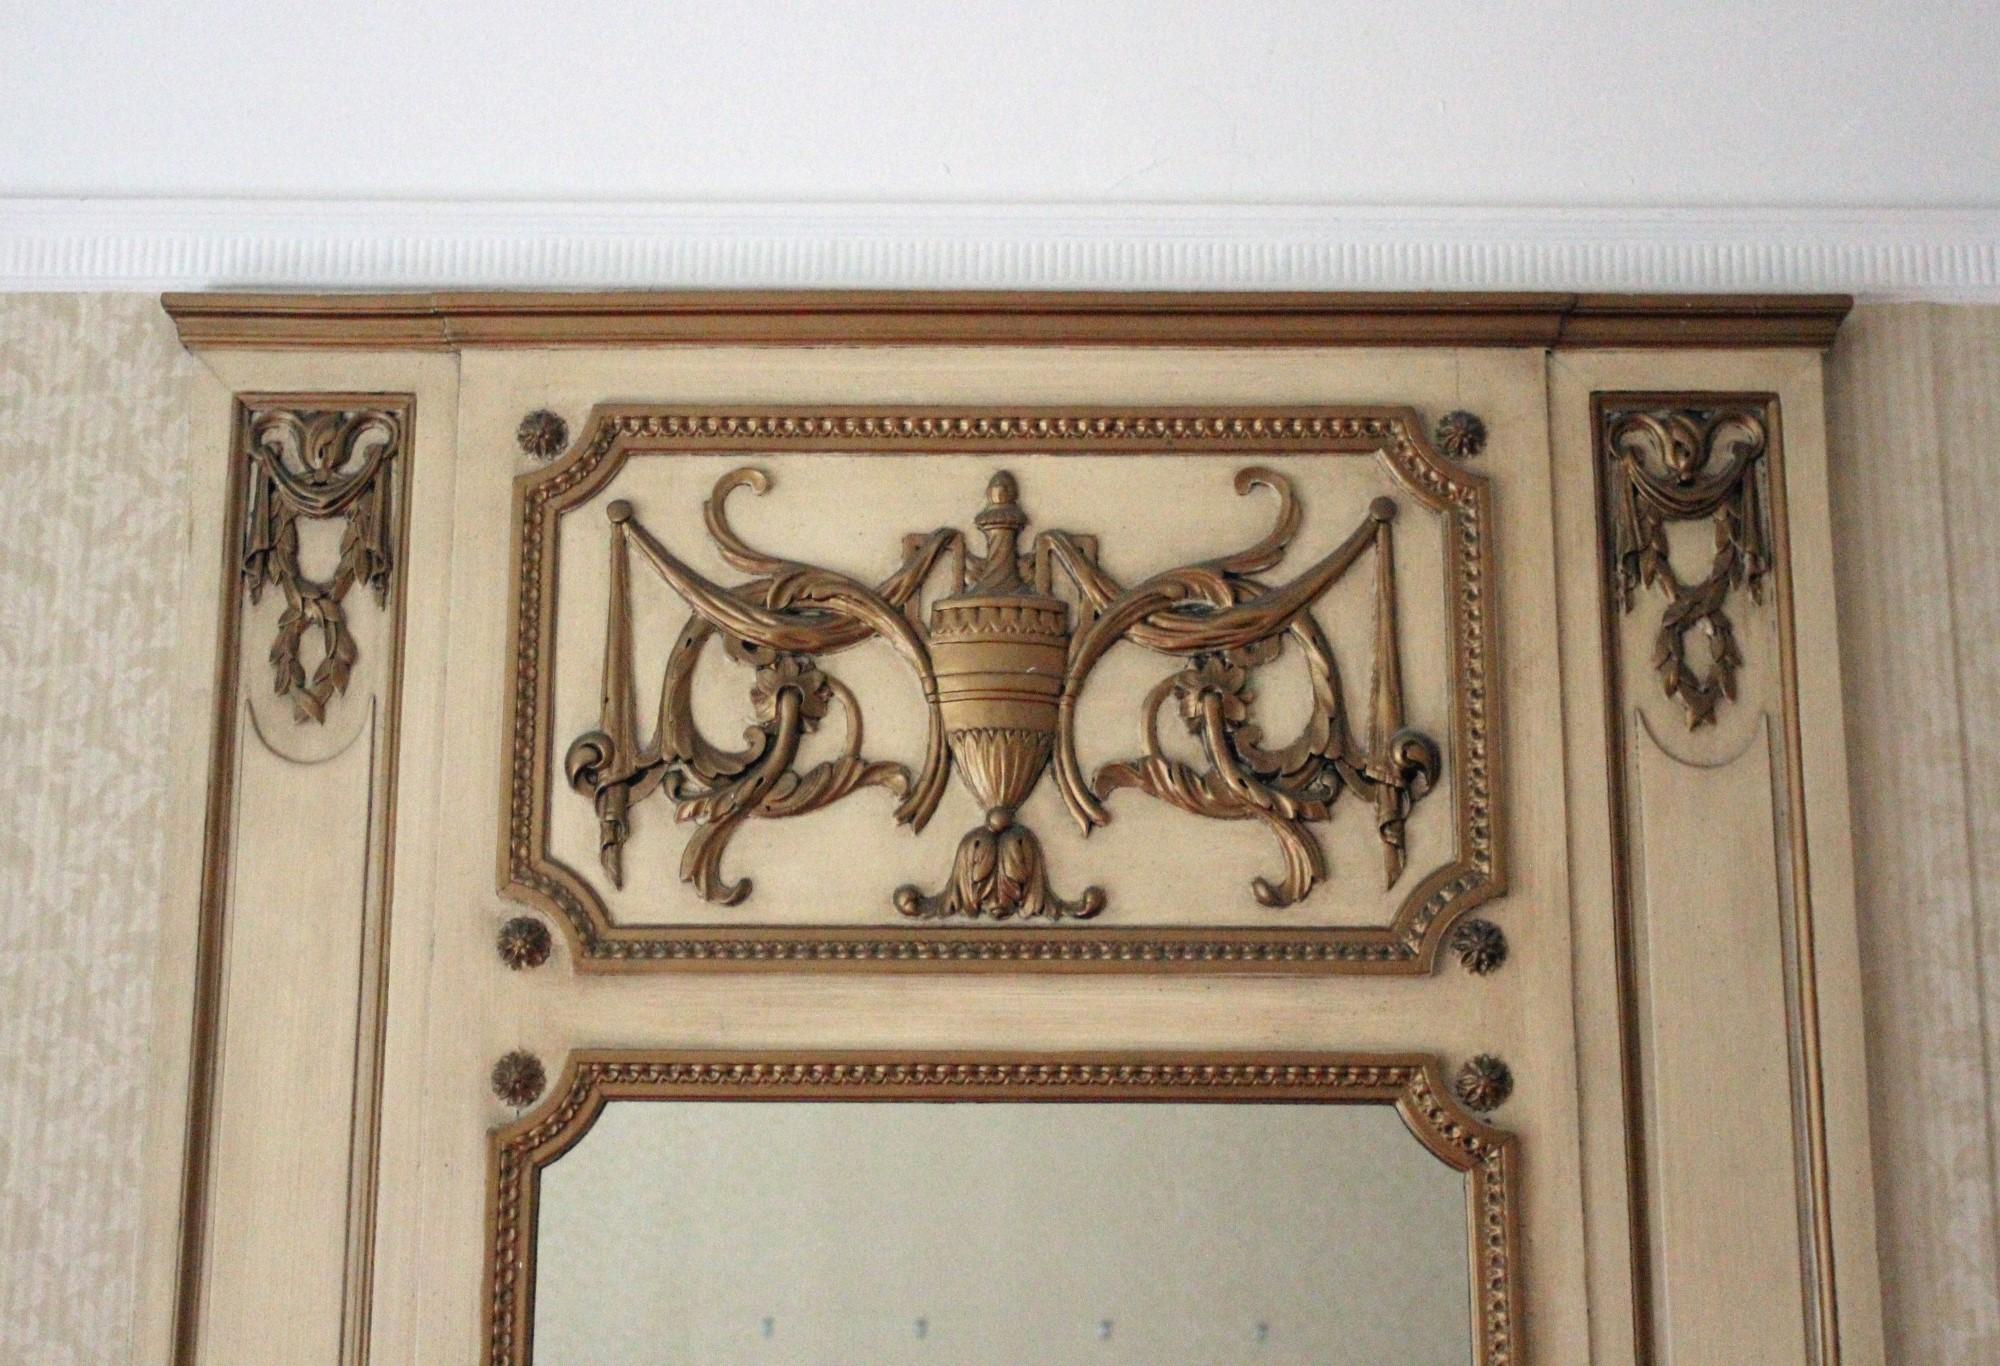 French Waldorf Astoria Hotel Tan + Gold Over Mantel Mirror from Suite 765